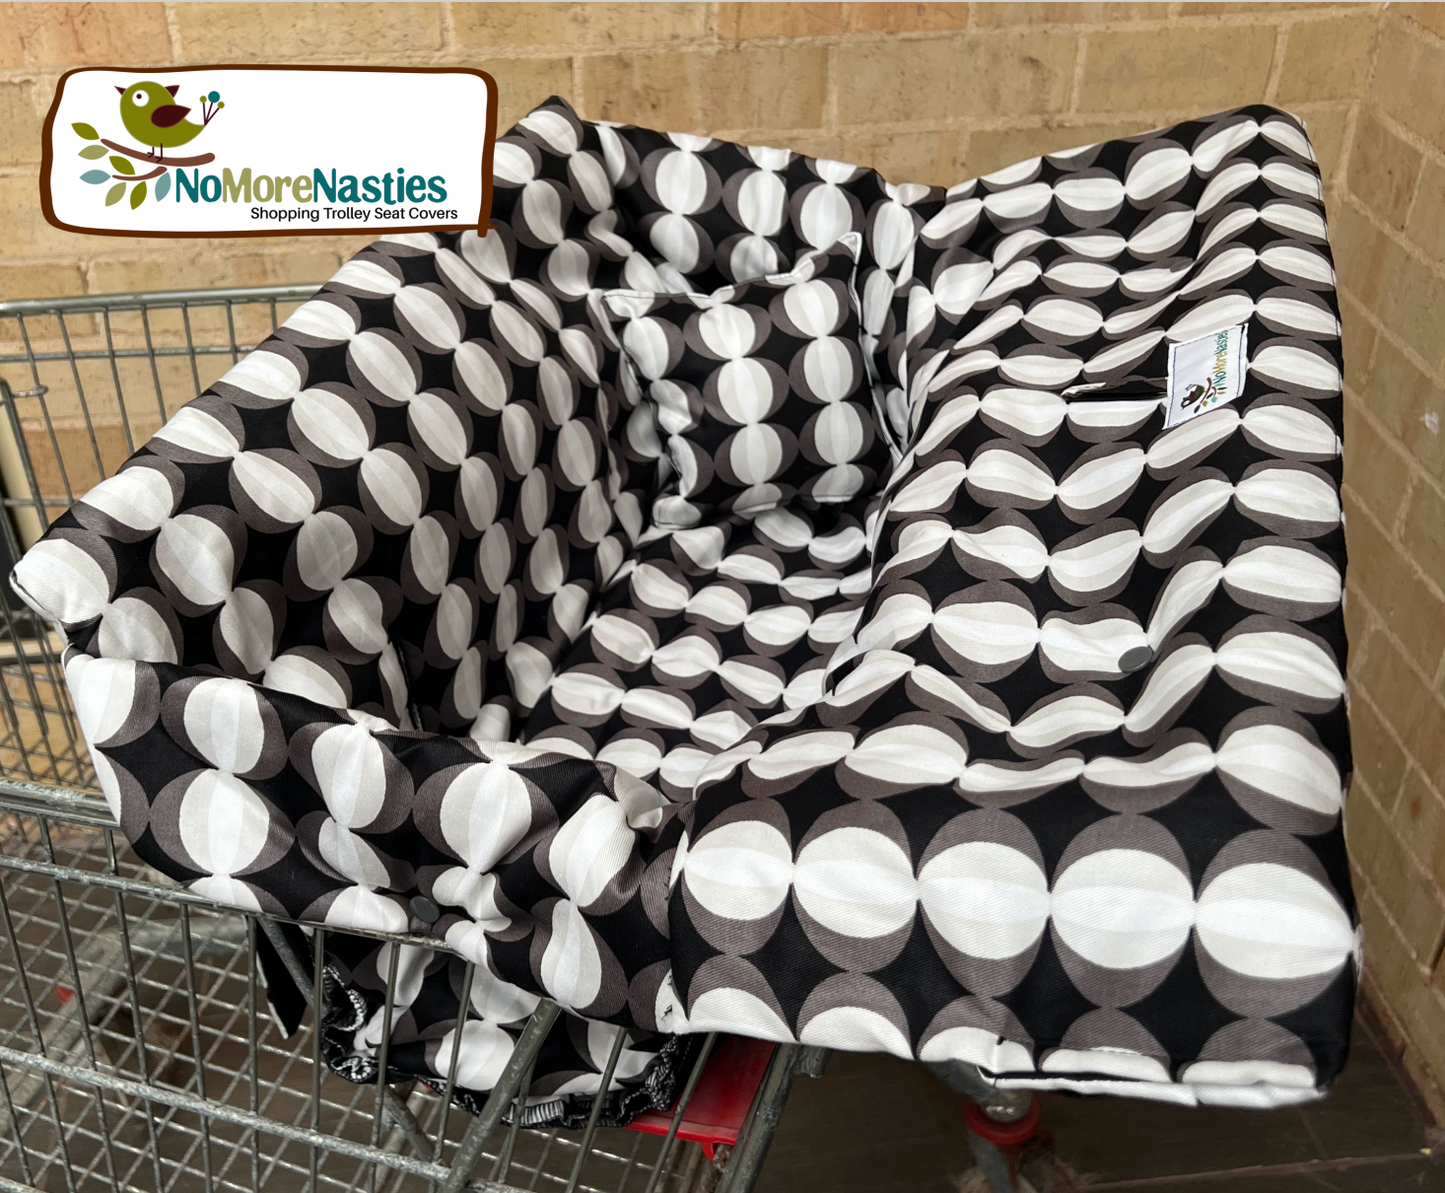 Rufus Shopping Trolley Seat Cover